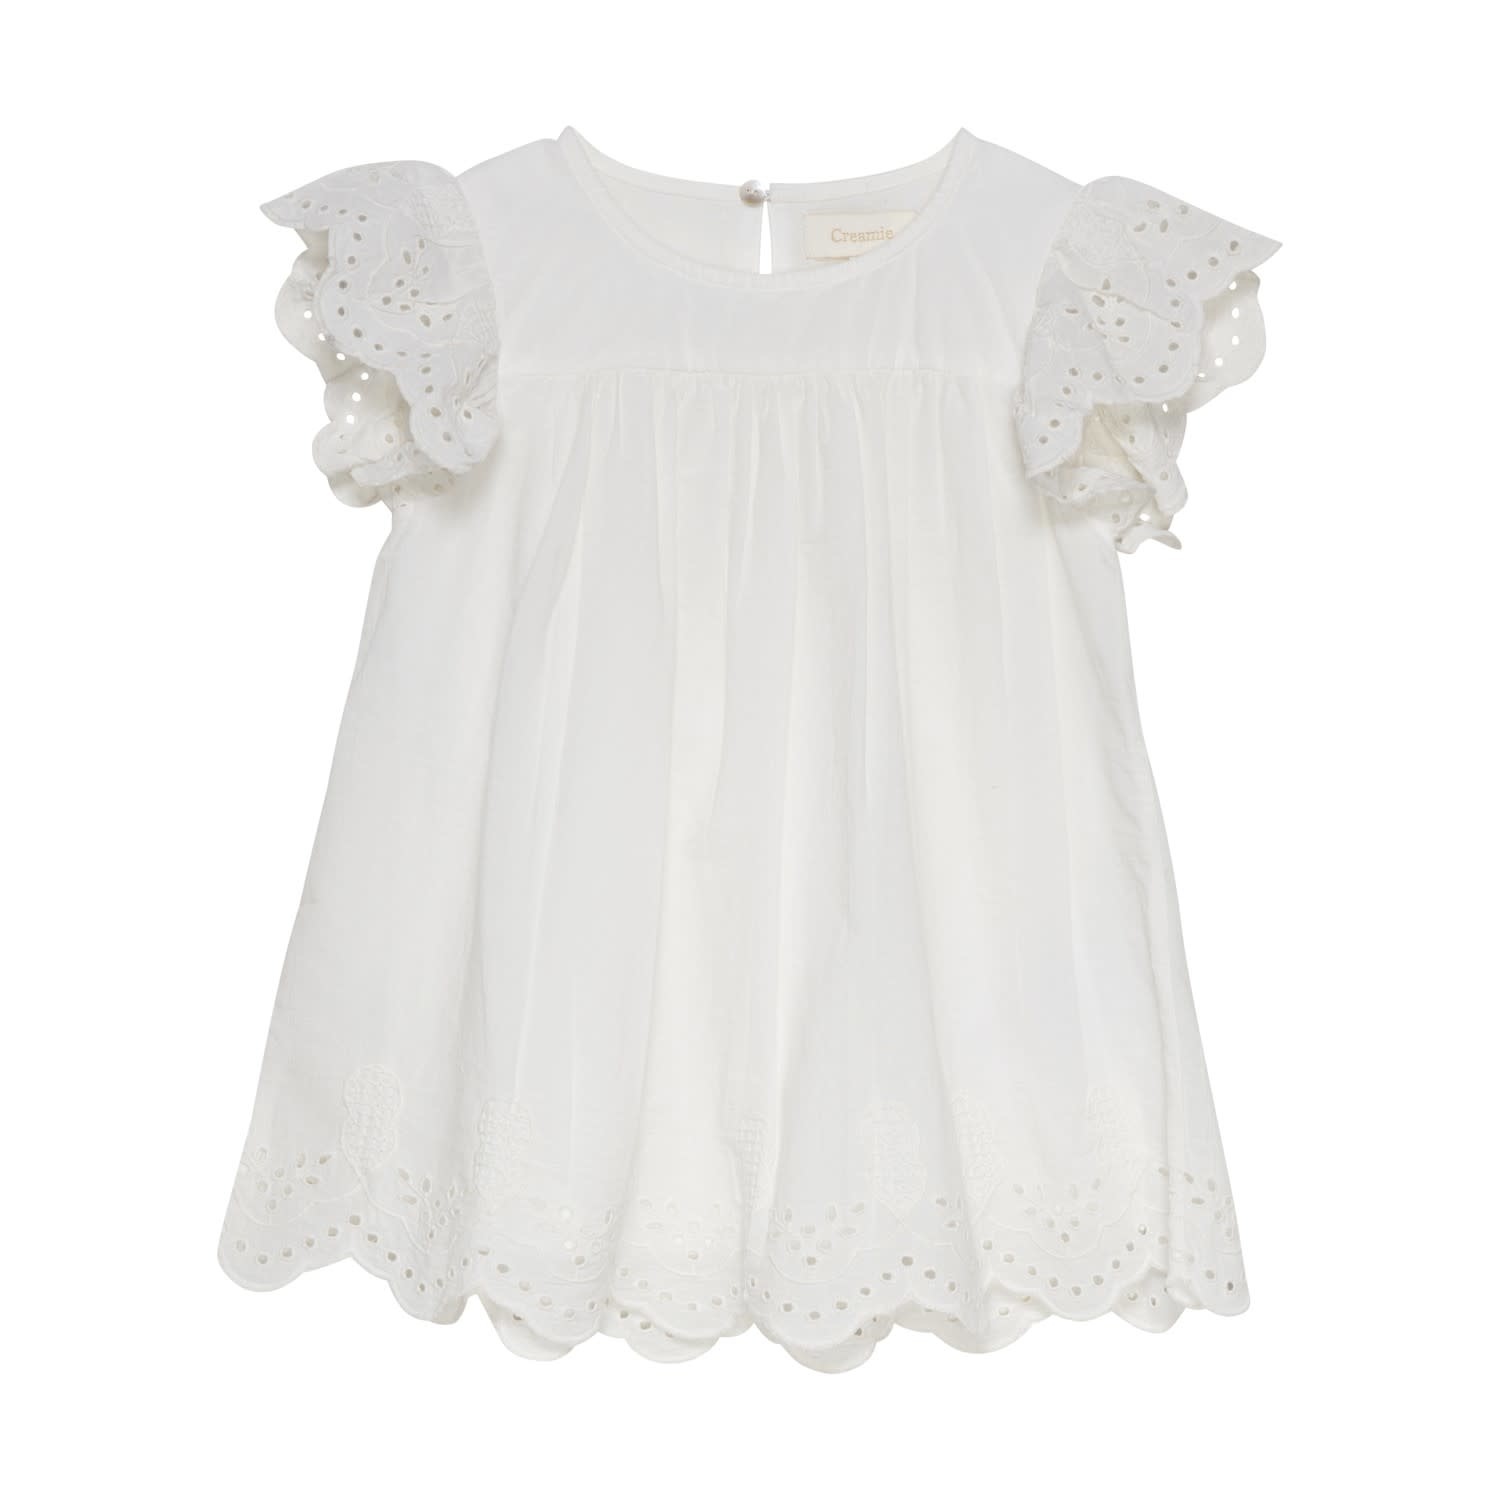 Creamie Cloud Embroidery Top